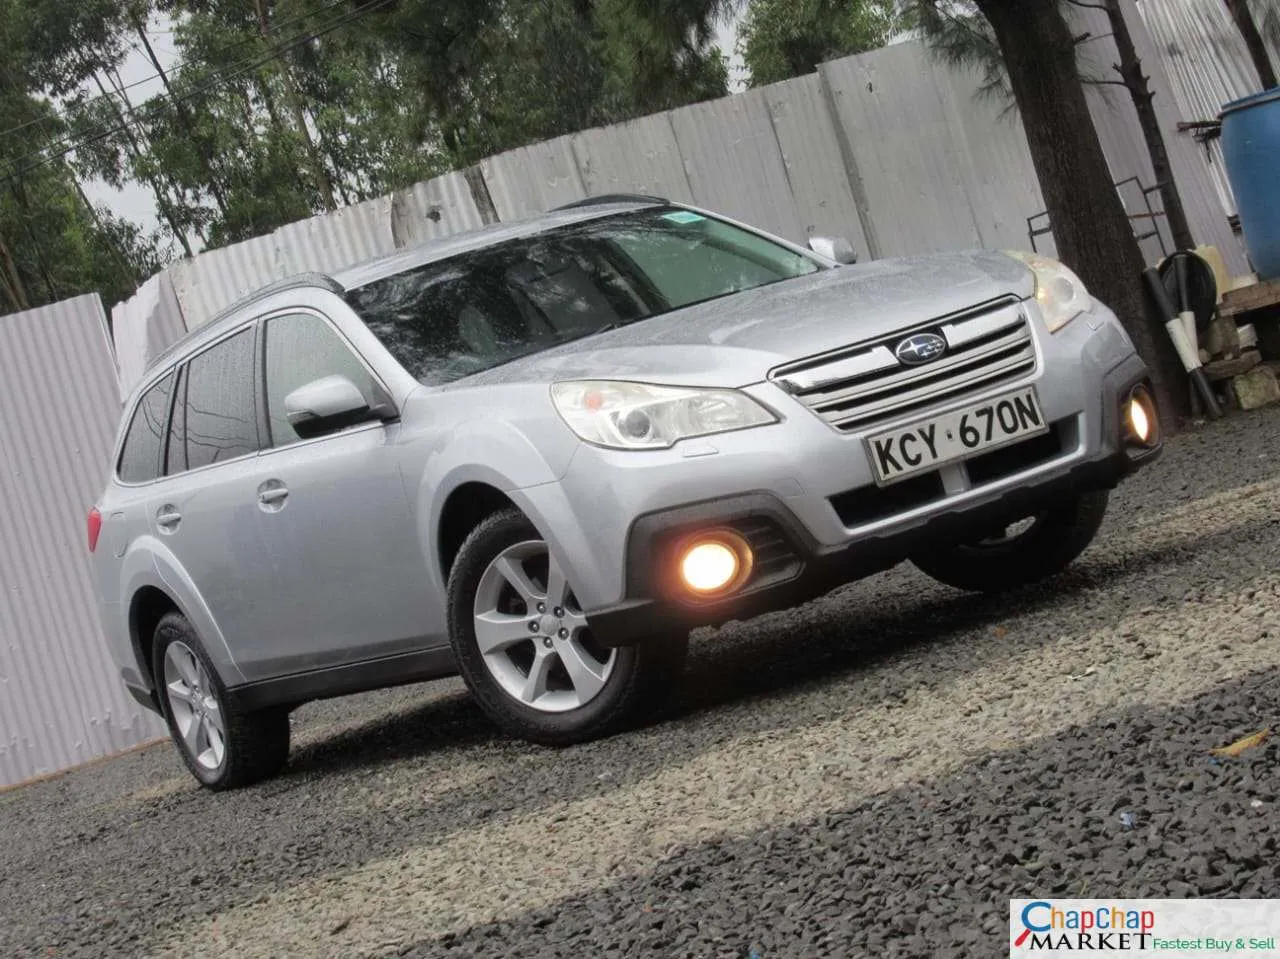 Cars Cars For Sale-Subaru OUTBACK for sale in kenya Asian owner You Pay 30% Deposit Trade in Ok hire purchase installments Subaru outback kenya 8